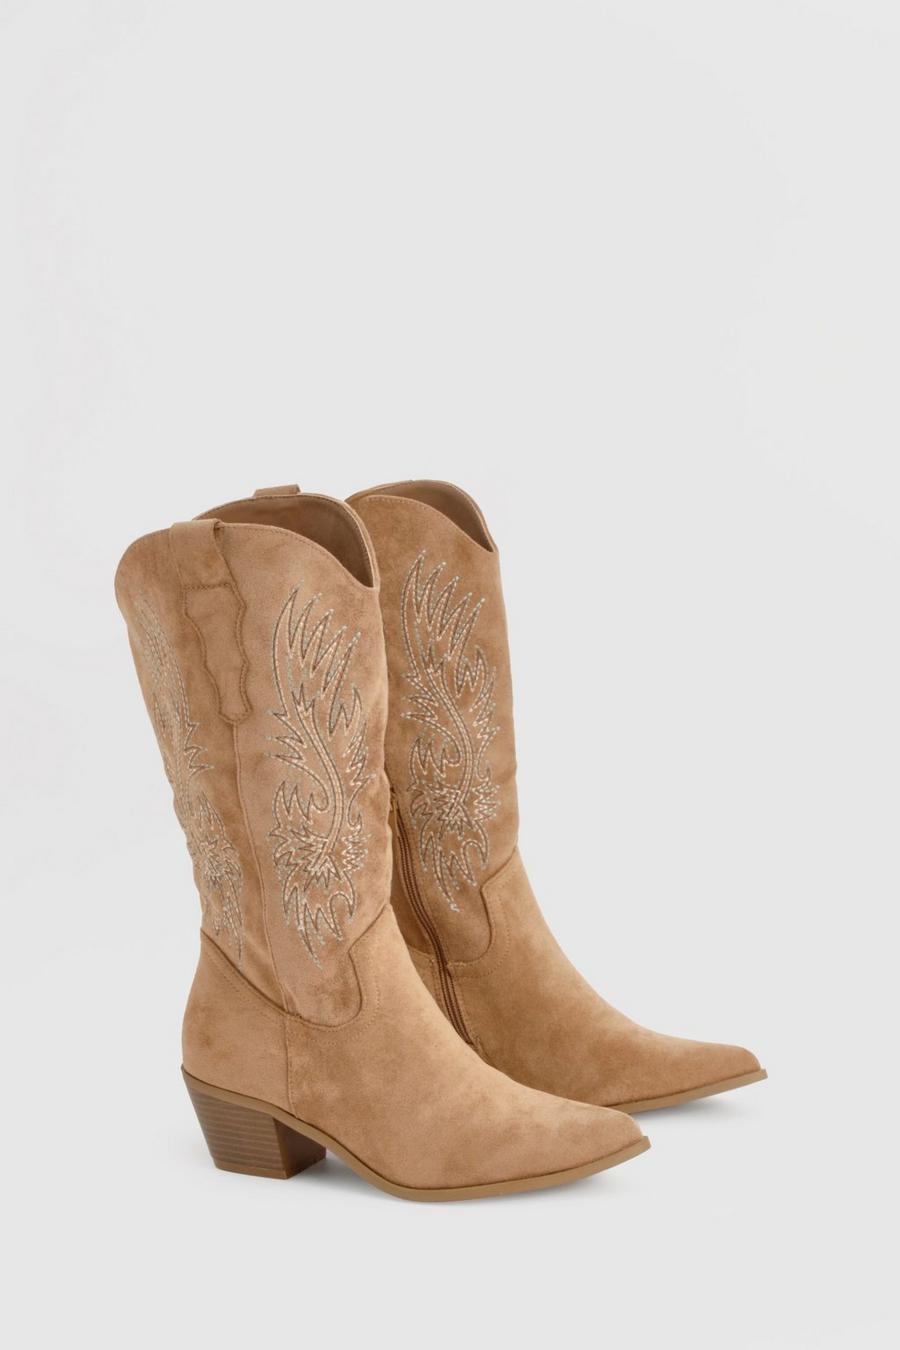 Camel Embroidered Knee High Cowboy Boots